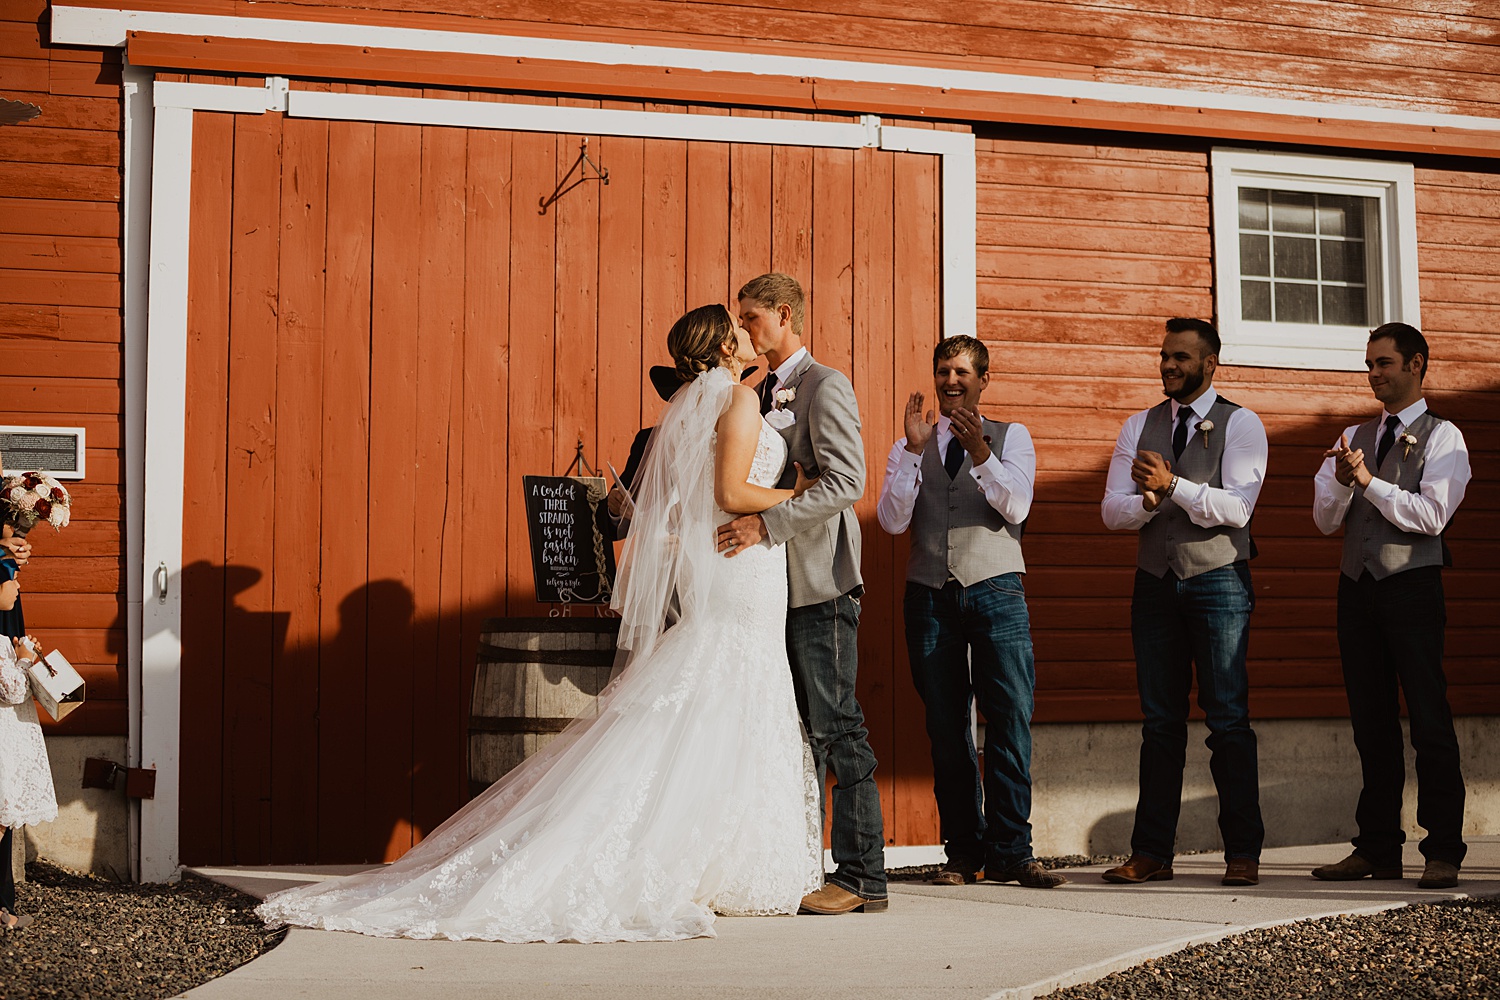 Ceremony Backdrop | Red Barn Wedding | Overland Trail Museum | Cassie Madden Photography